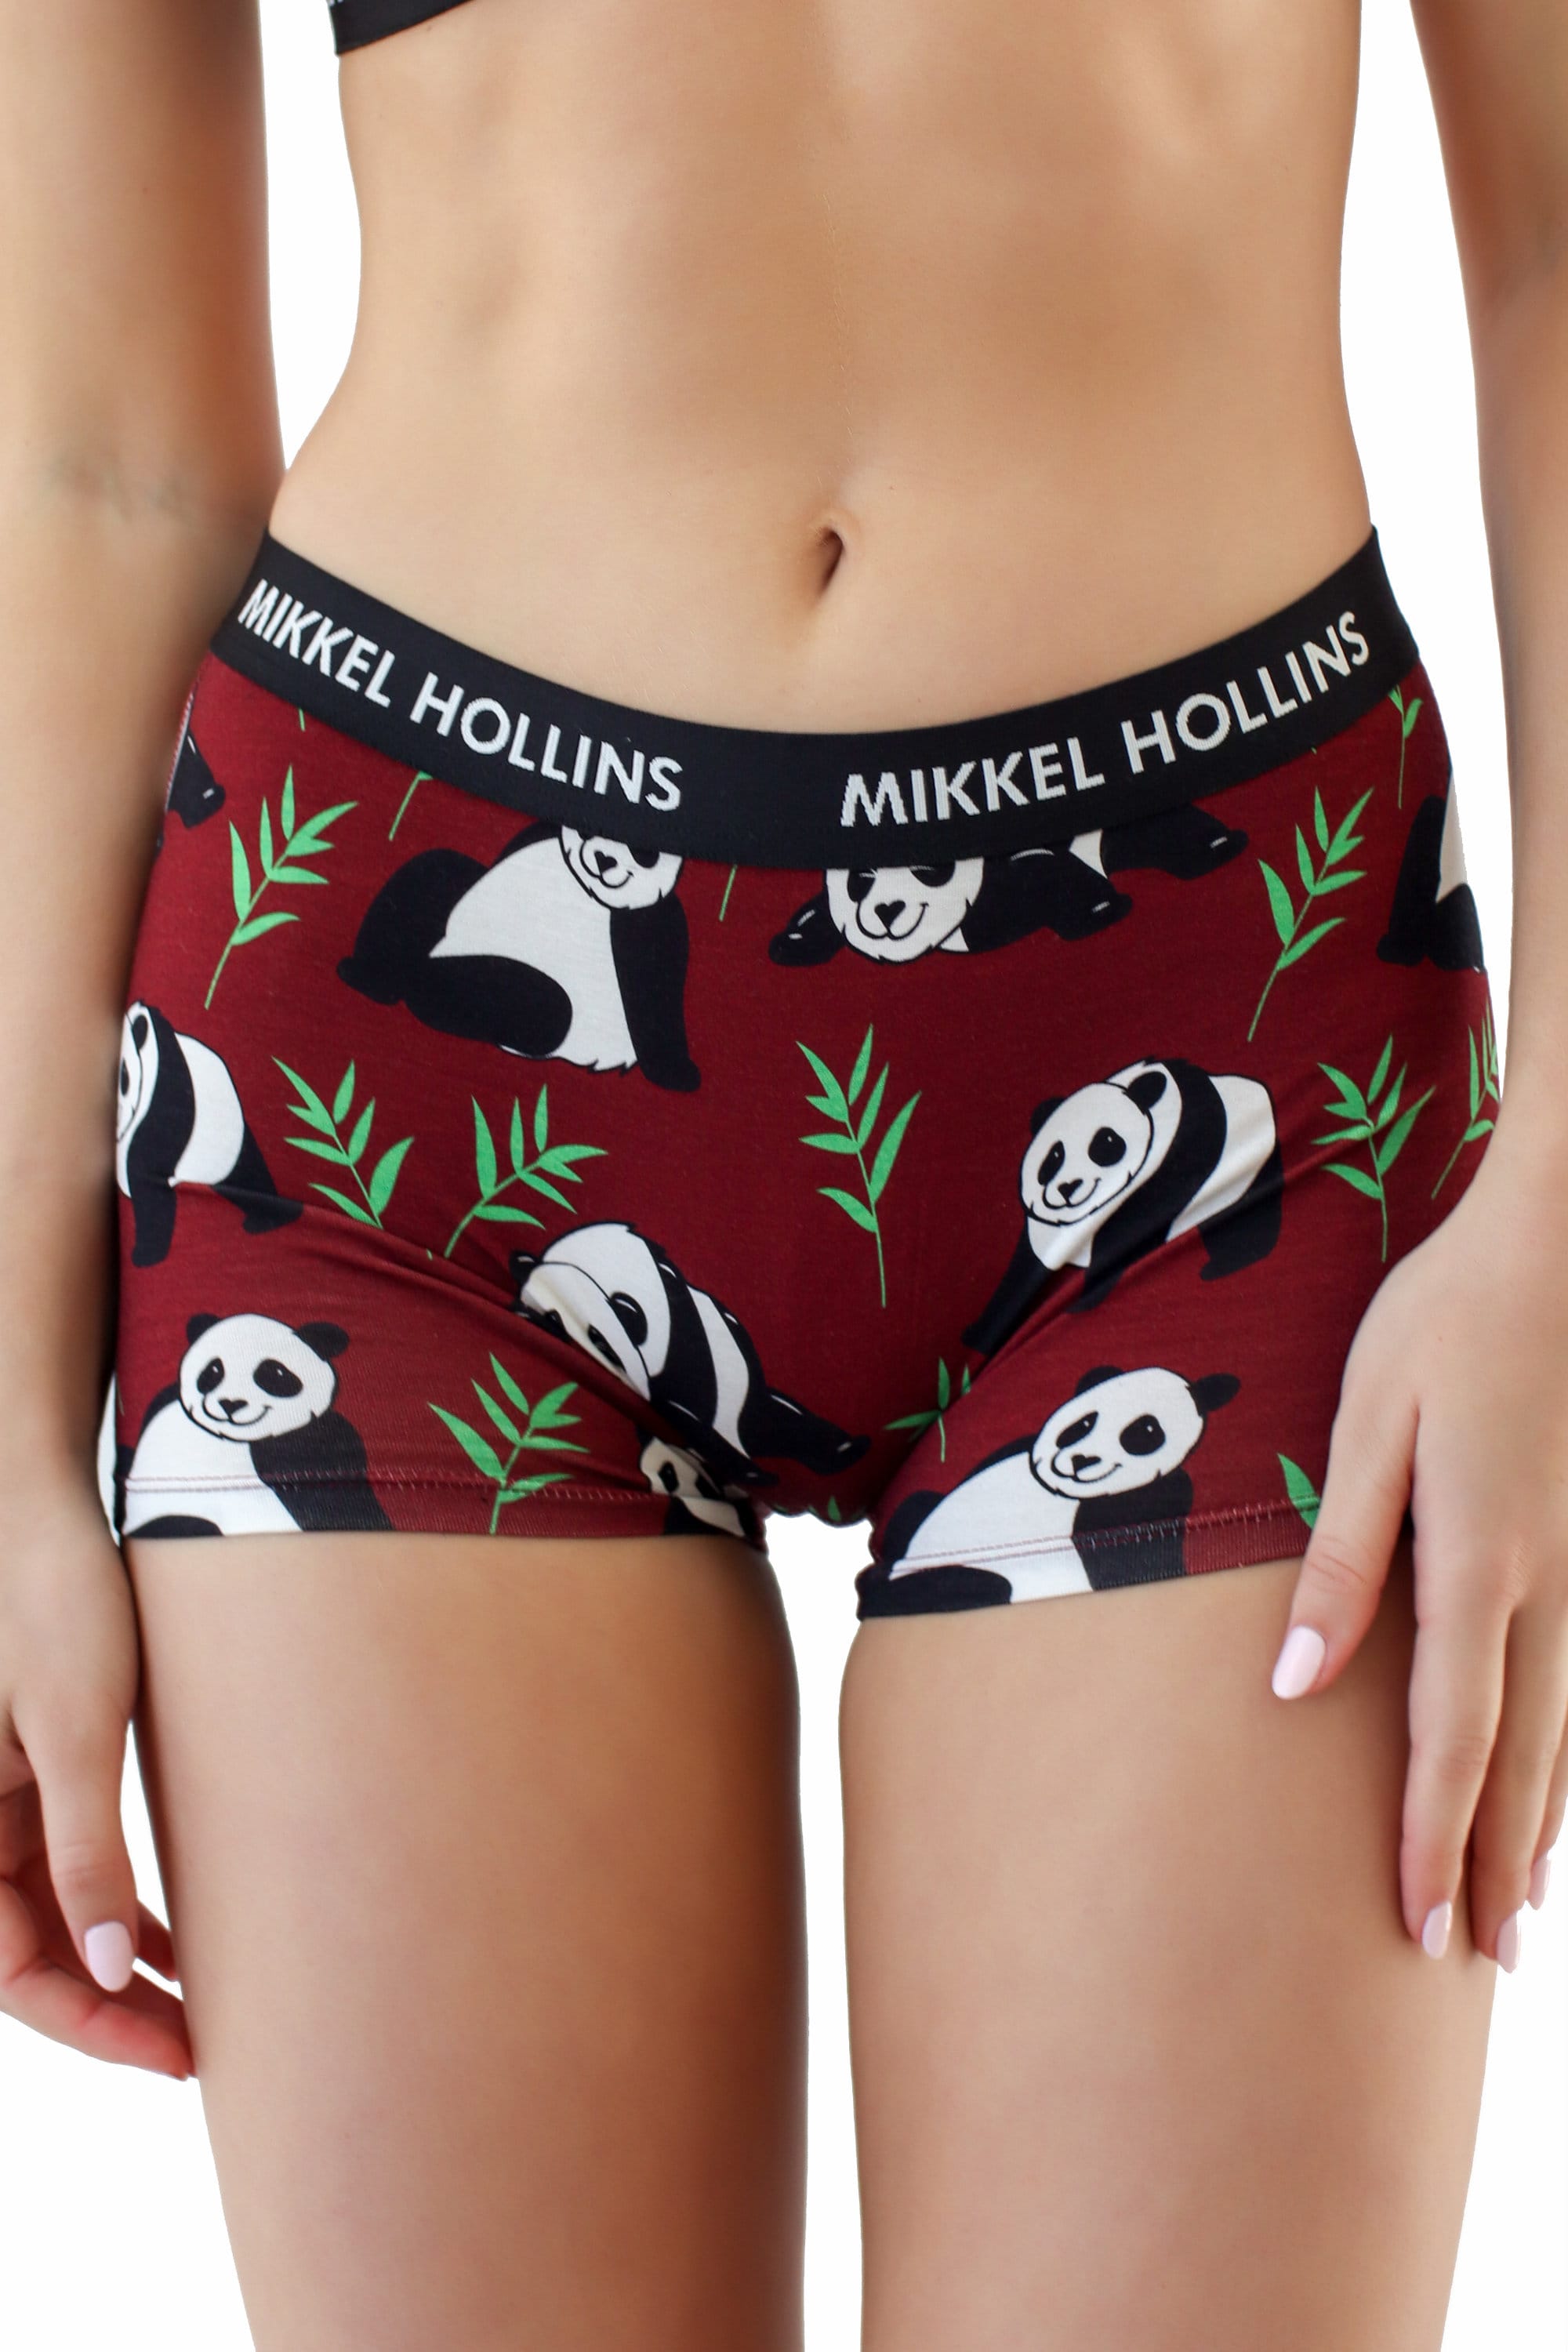 Couple Matching Underwear Set, Lazy Panda Design, Mix and Match From Men  Boxer, Women Thong-hipster-boy Shot and Bralette 